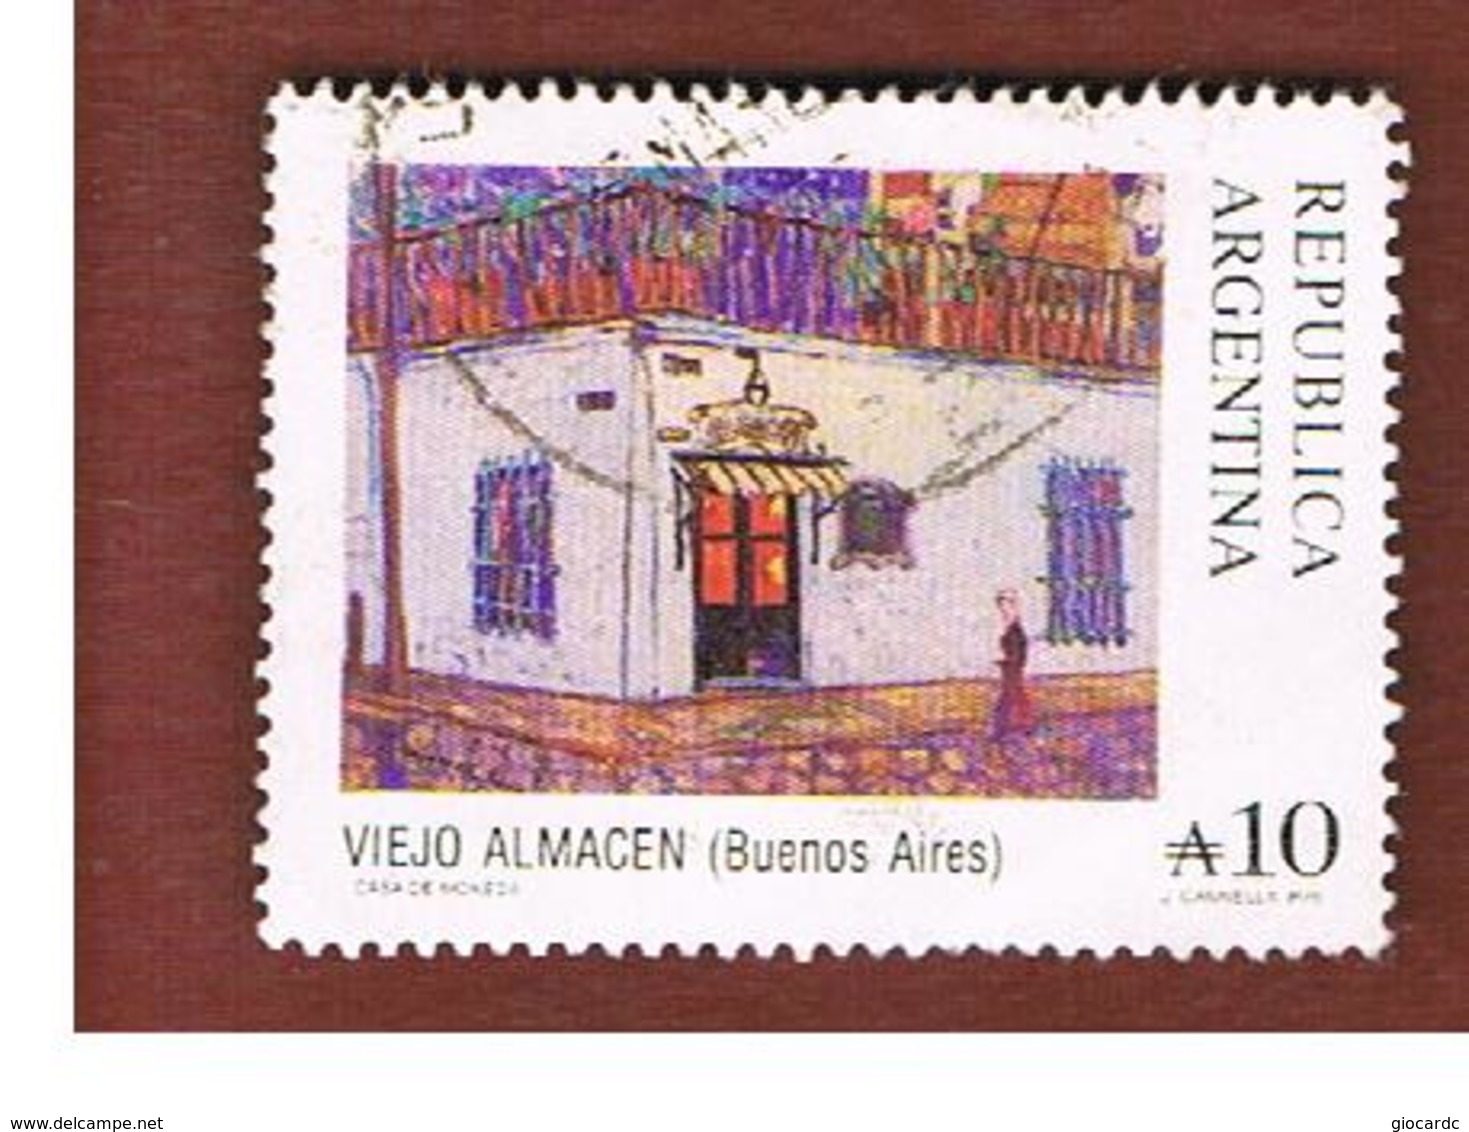 ARGENTINA - SG 2092  - 1988 HISTORICAL SITES: VIEJO ALMACEN  (WITHOUT EL BEFORE VIEJIO)  -    USED ° - Used Stamps